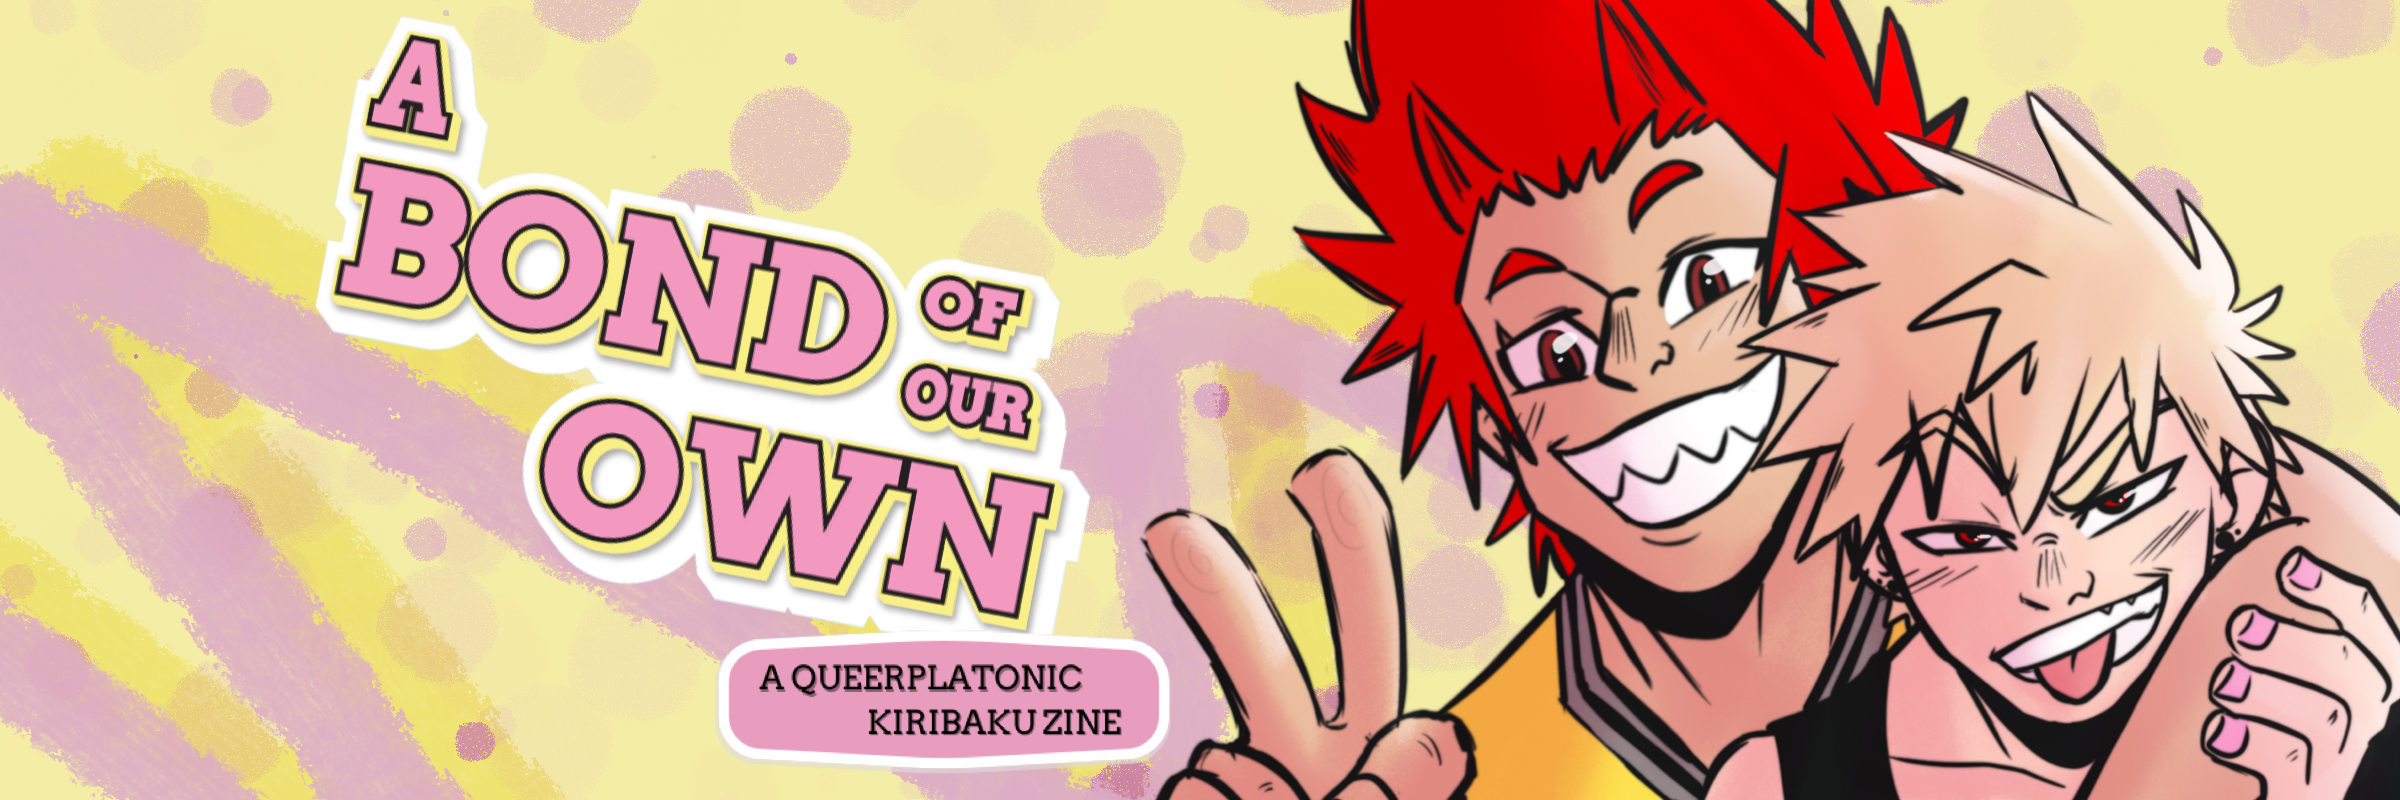 a bond of our own: a queerplatonic KRBK zine